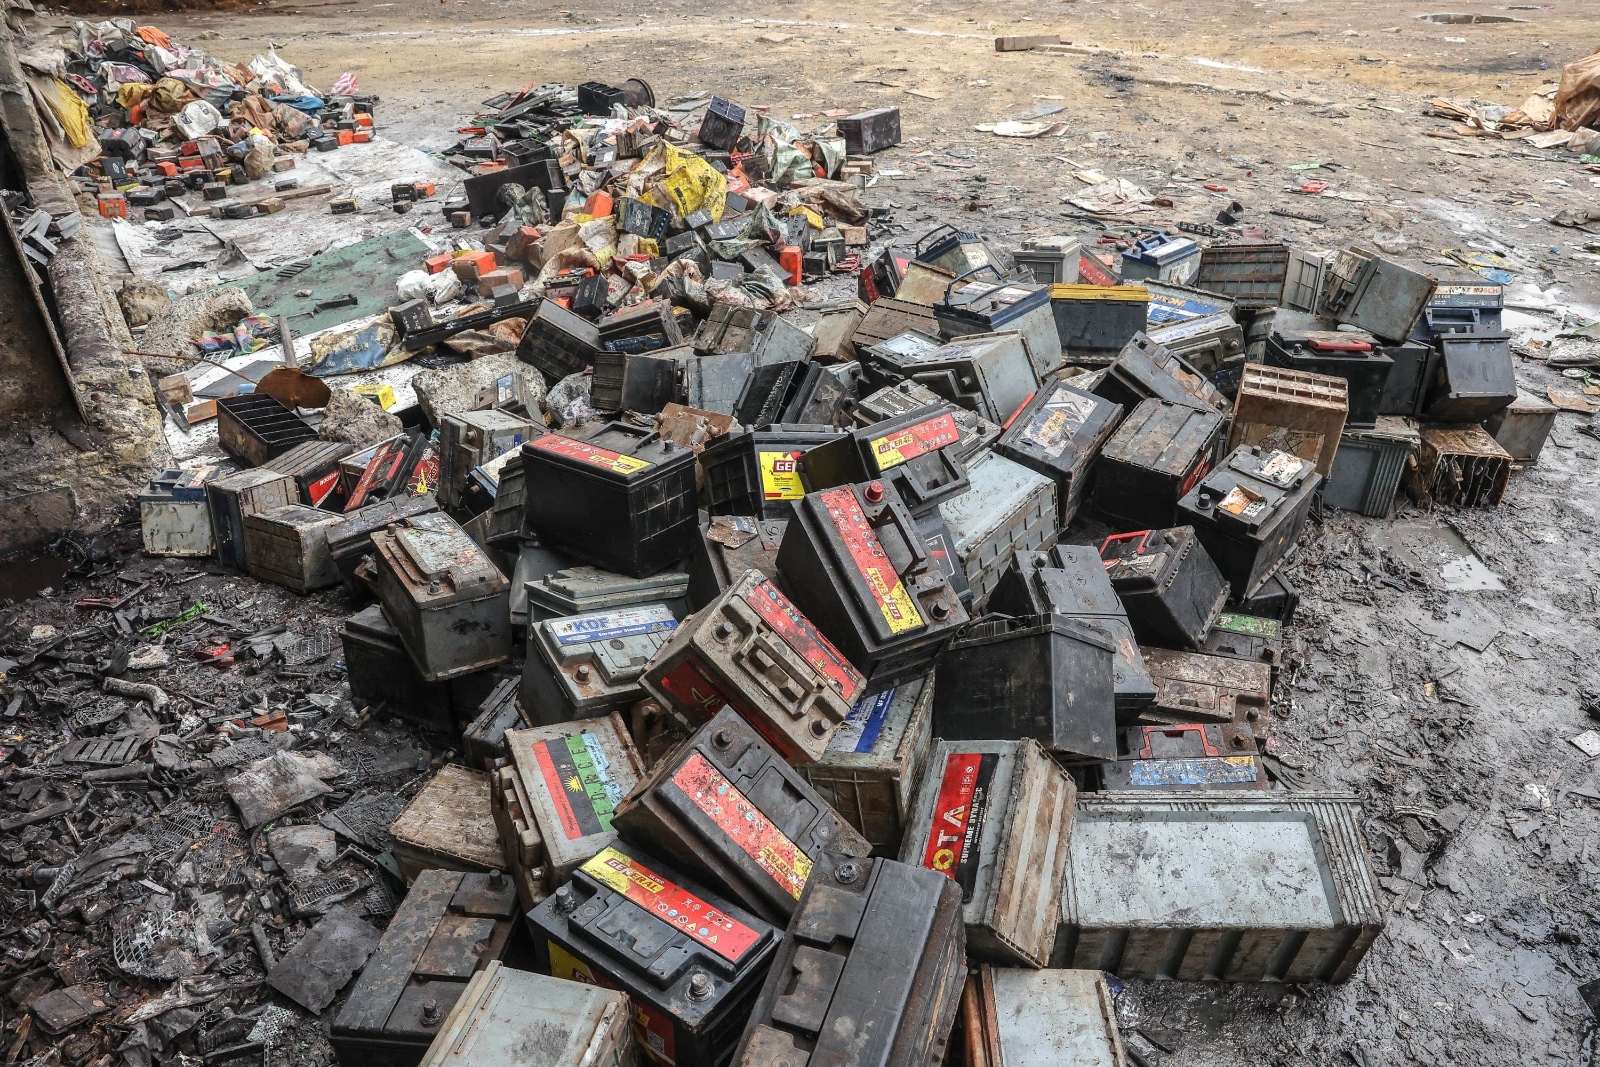 A huge pile of black boxes are scattered on the ground.